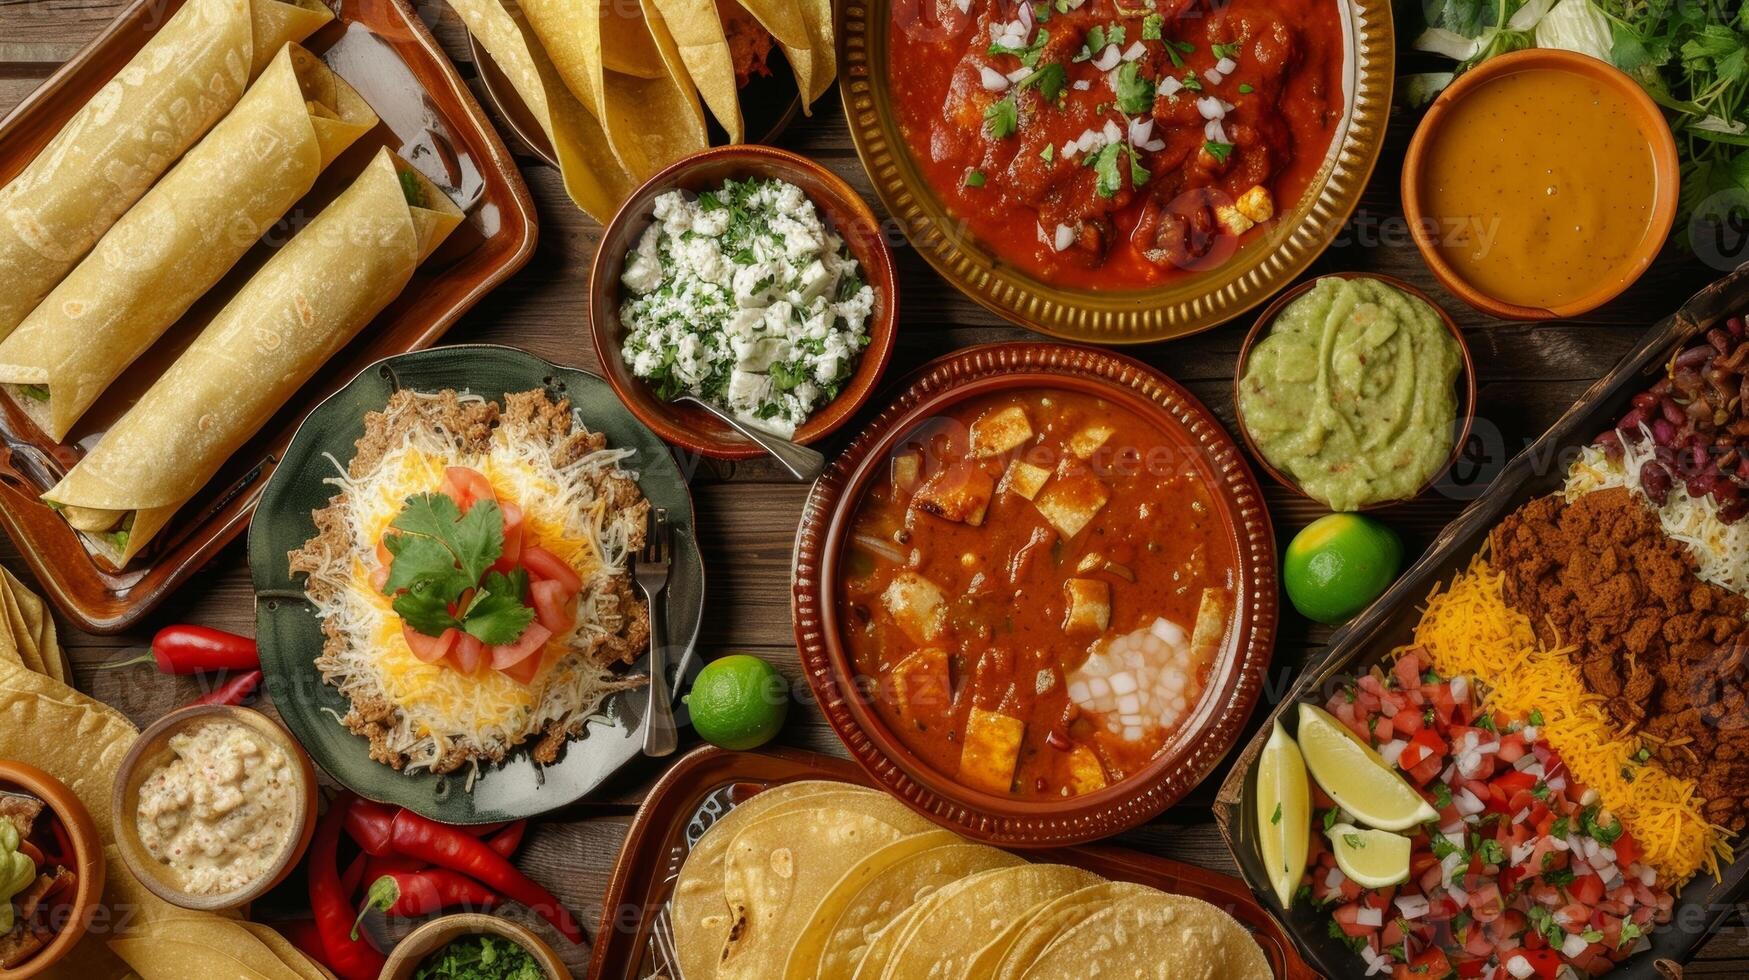 A spread of traditional Mexican dishes including tacos enchiladas and tamales all made with fresh and local ingredients photo